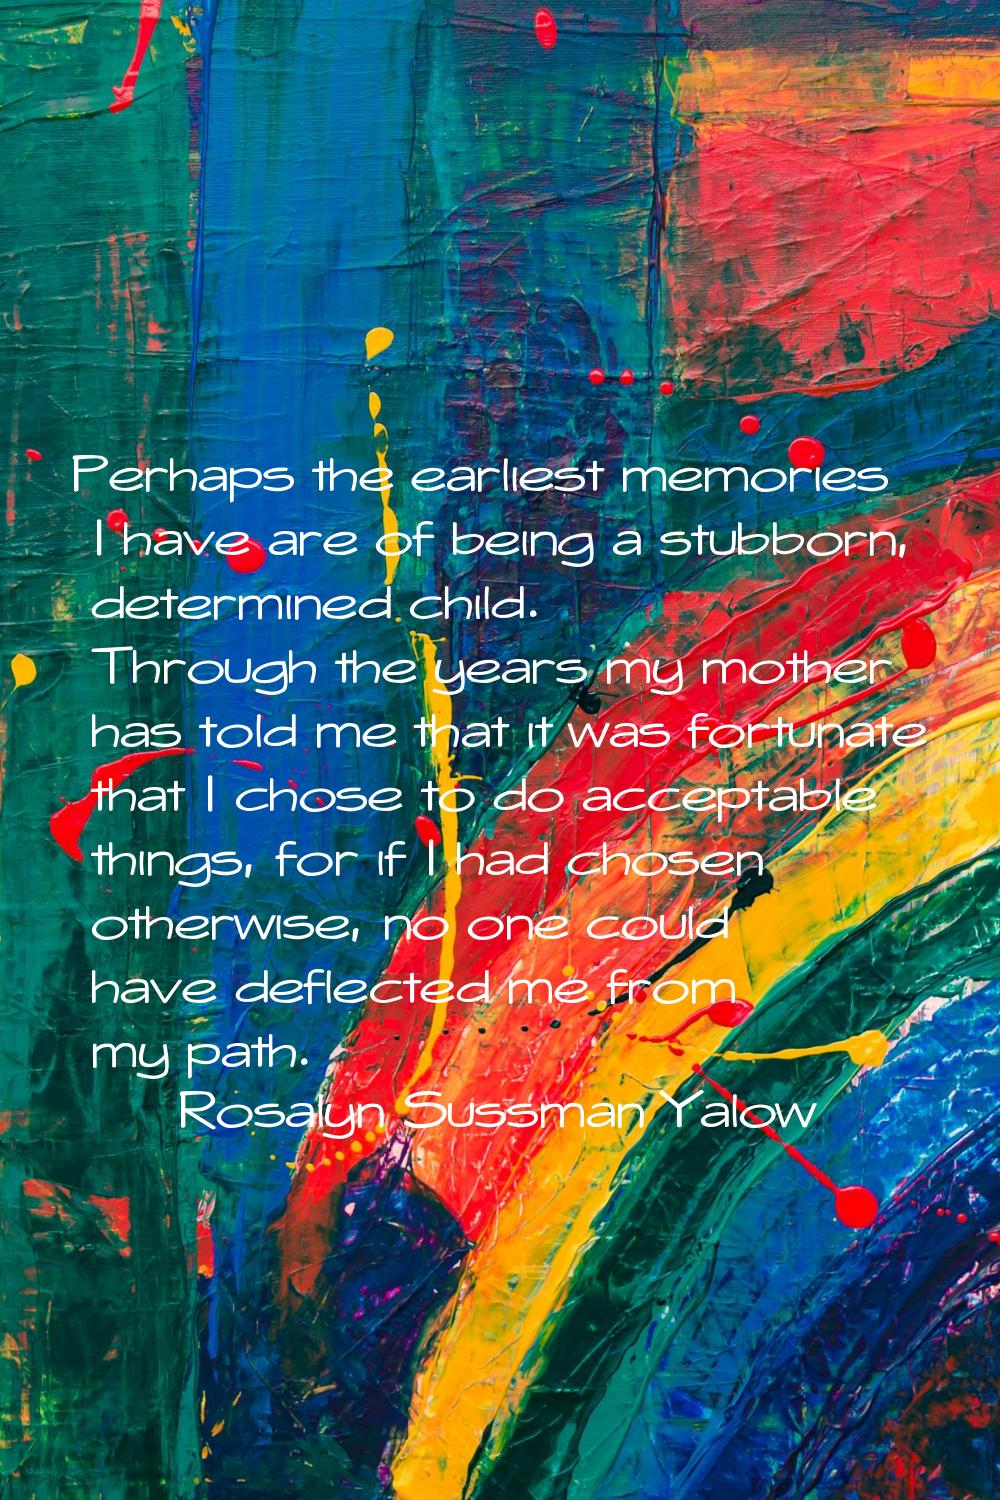 Perhaps the earliest memories I have are of being a stubborn, determined child. Through the years m